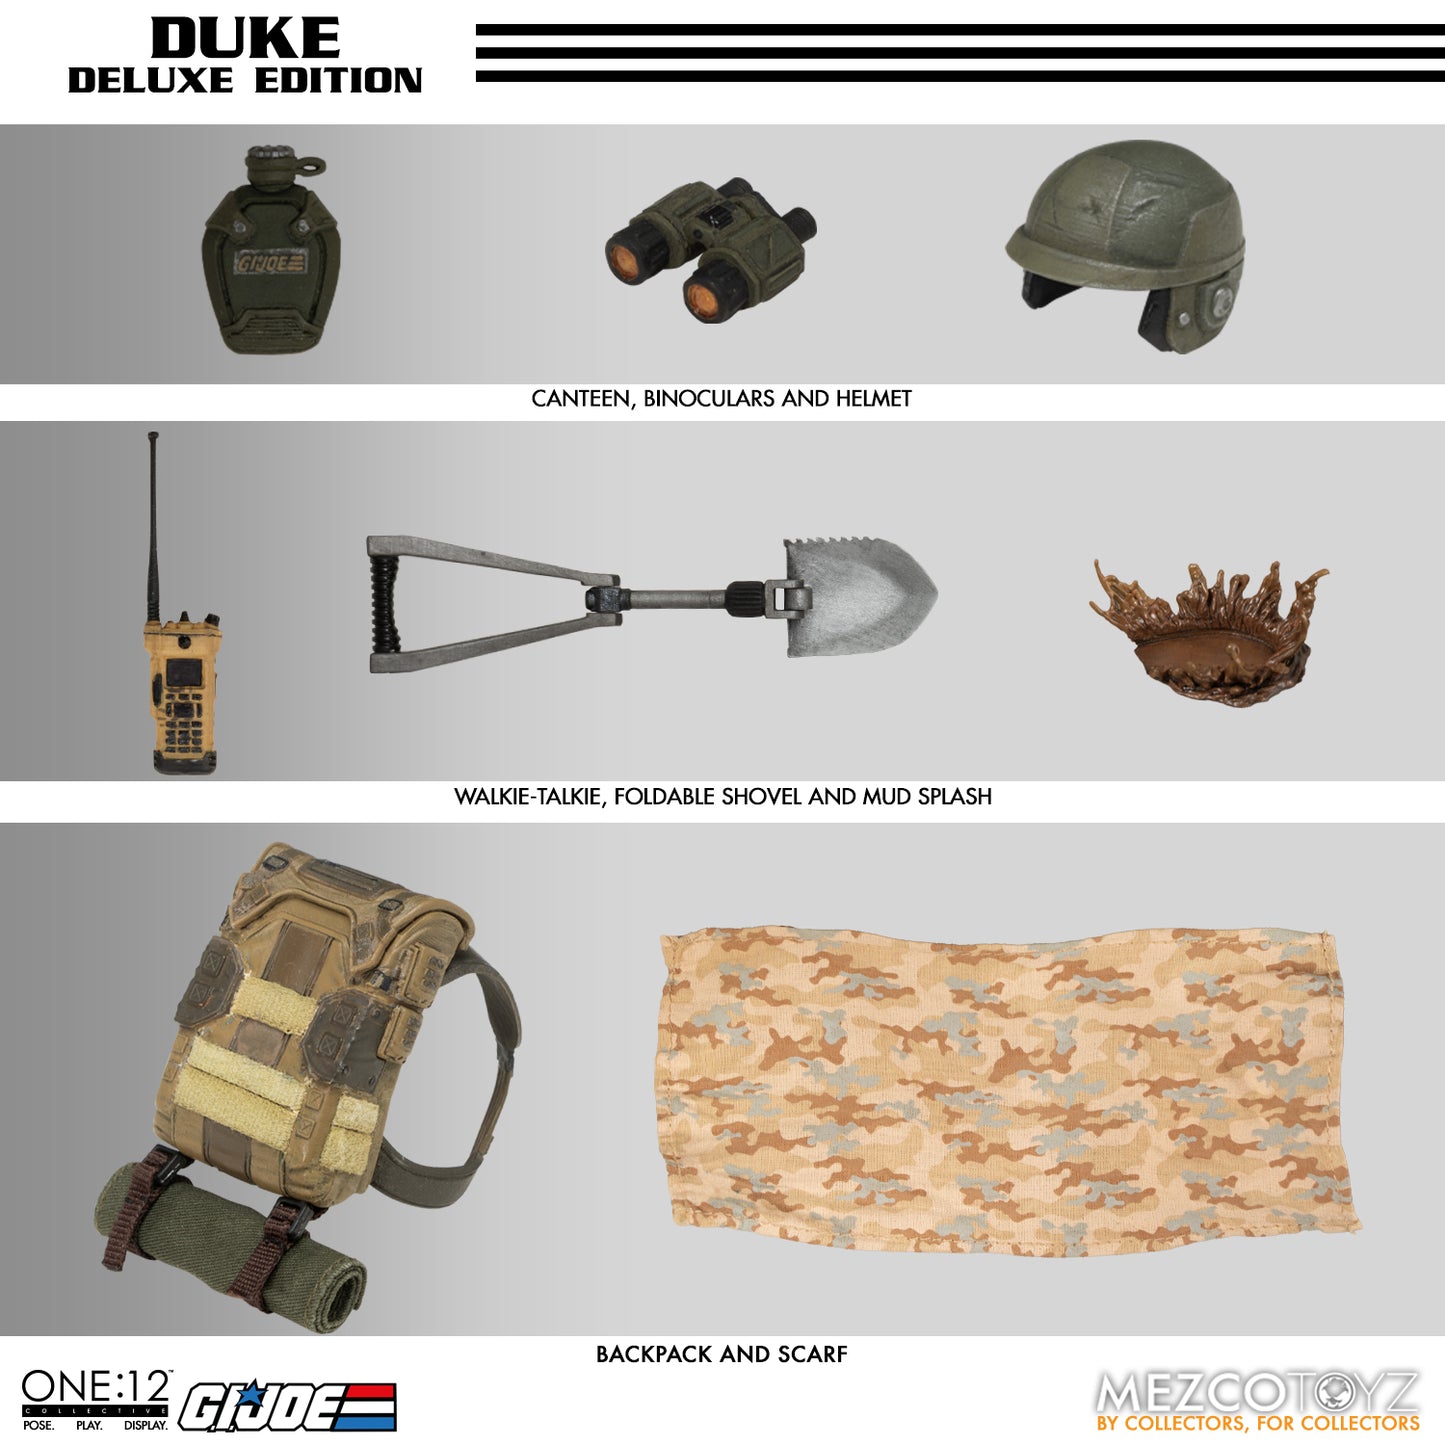 One-12 Collective G.I. Joe Duke Deluxe Edition Action Figure